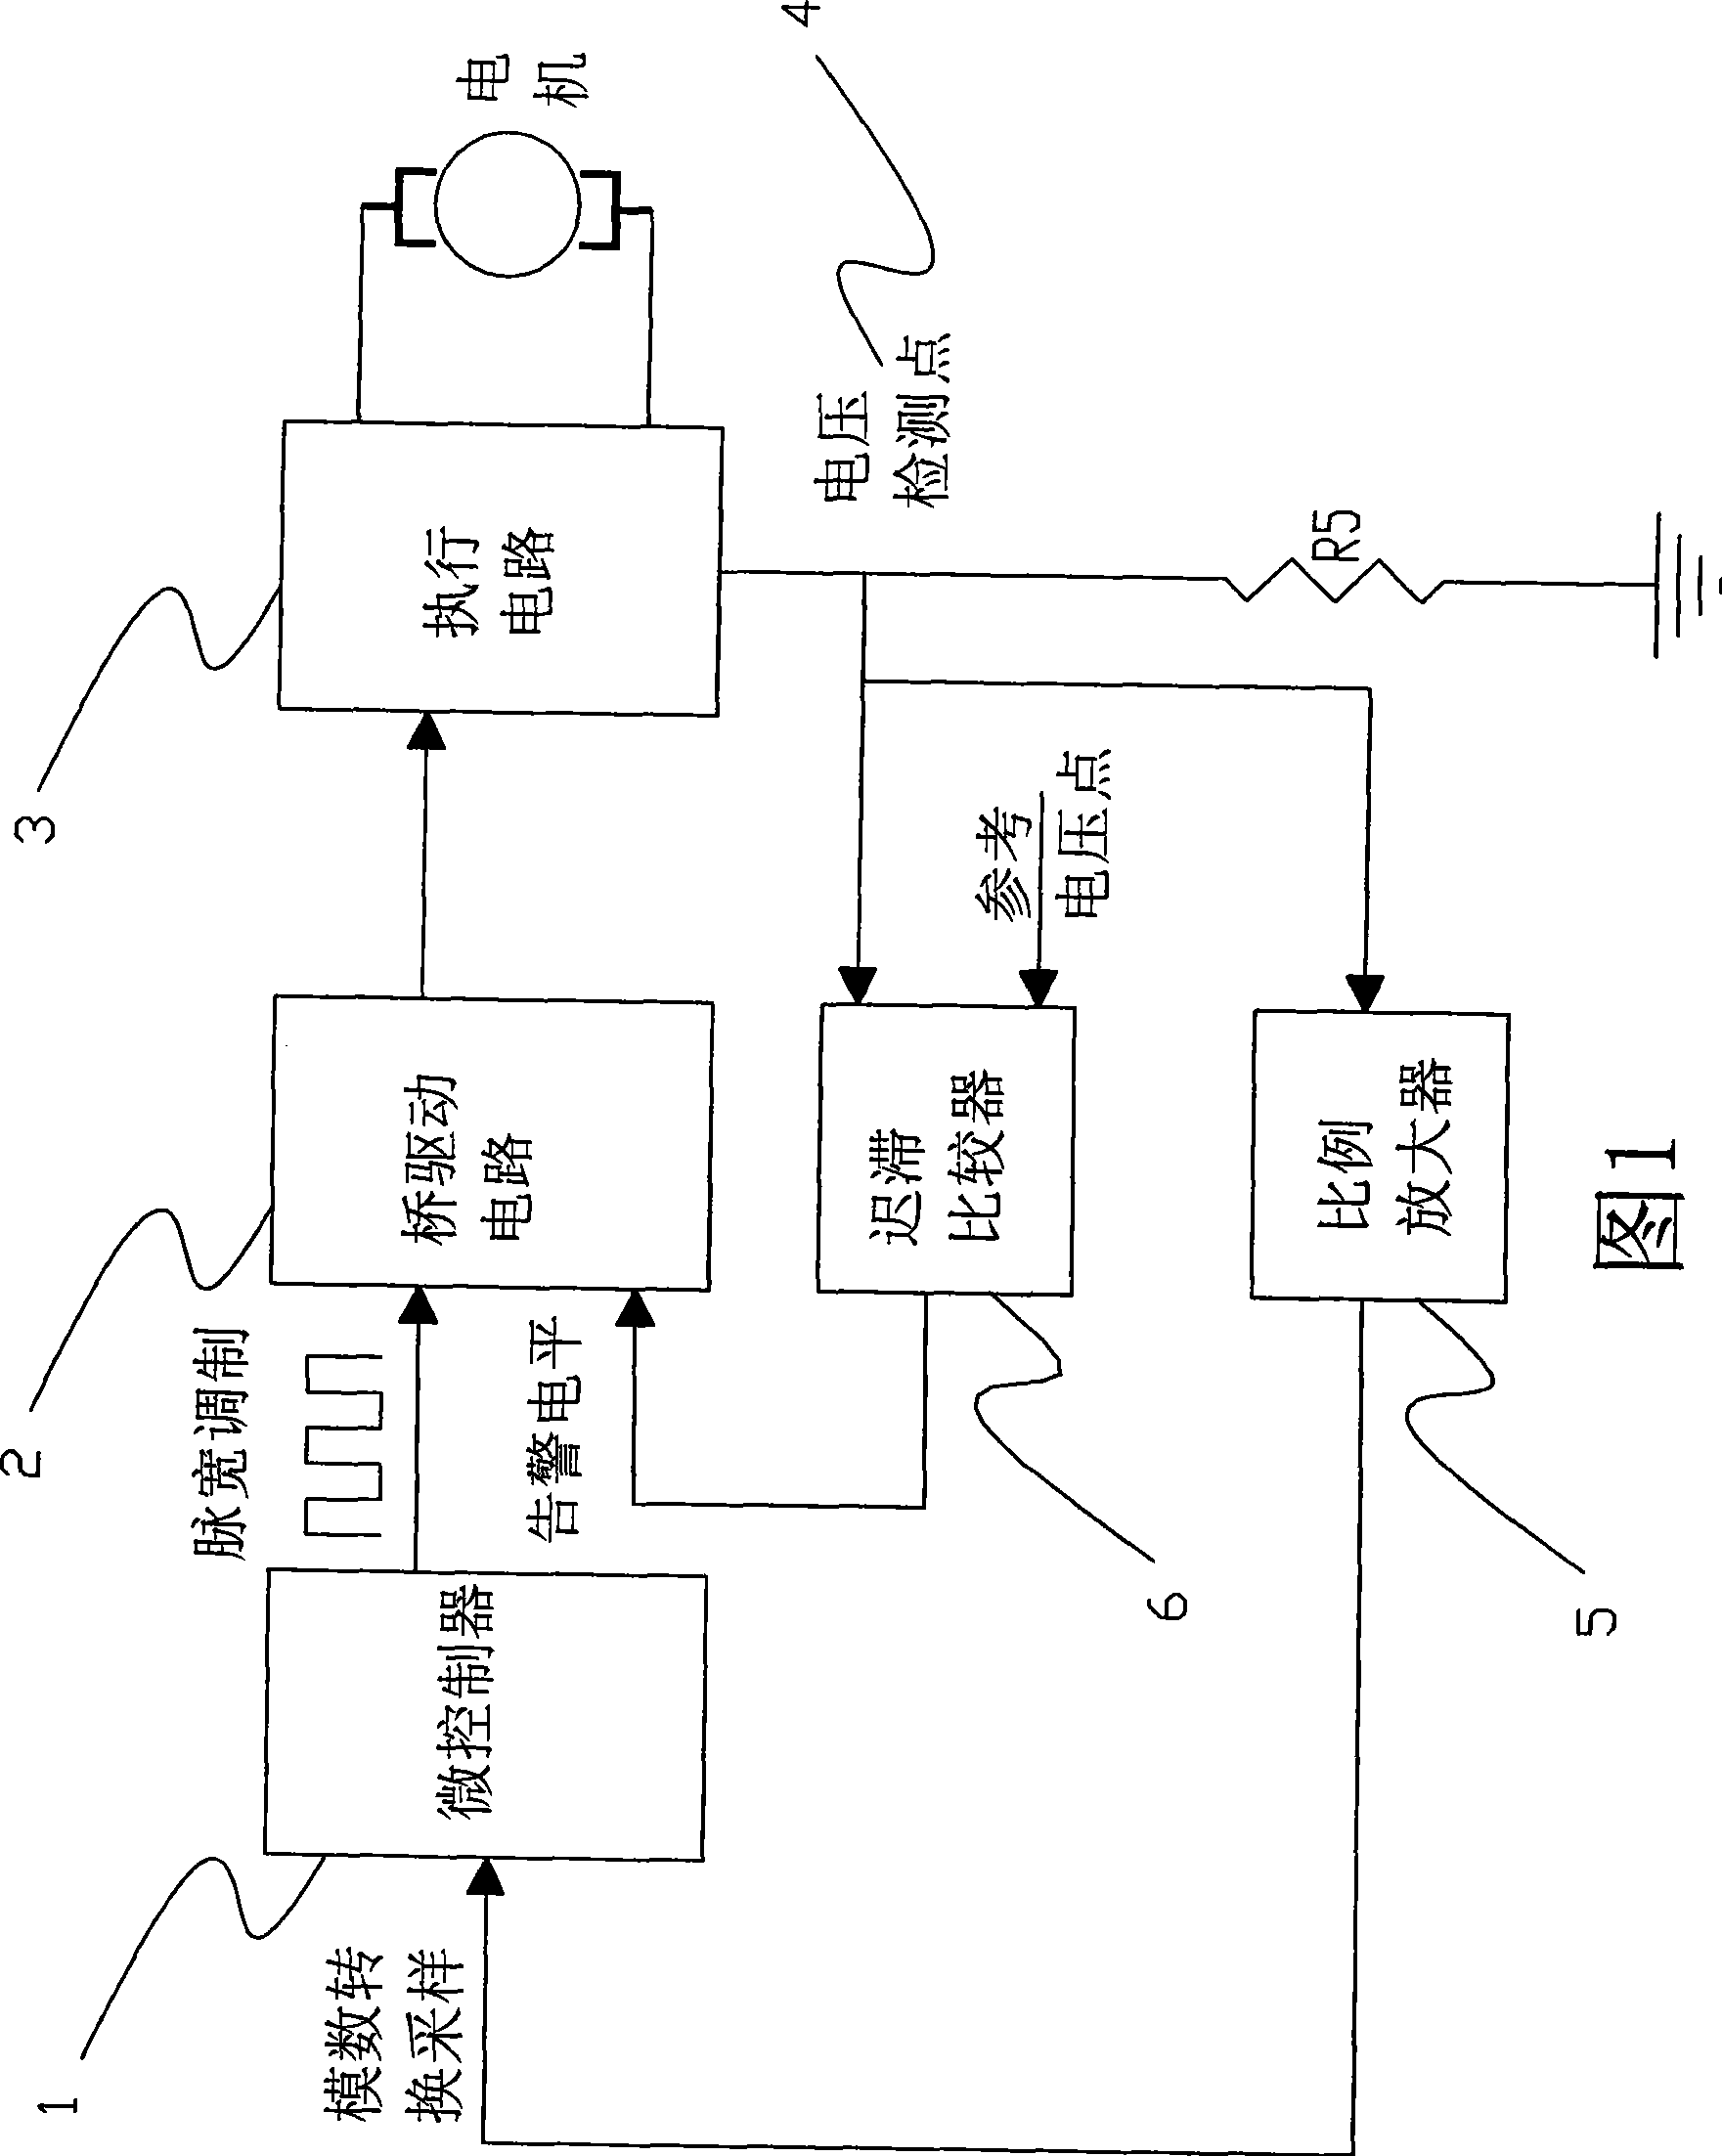 Overcurrent protective device for DC brush motor